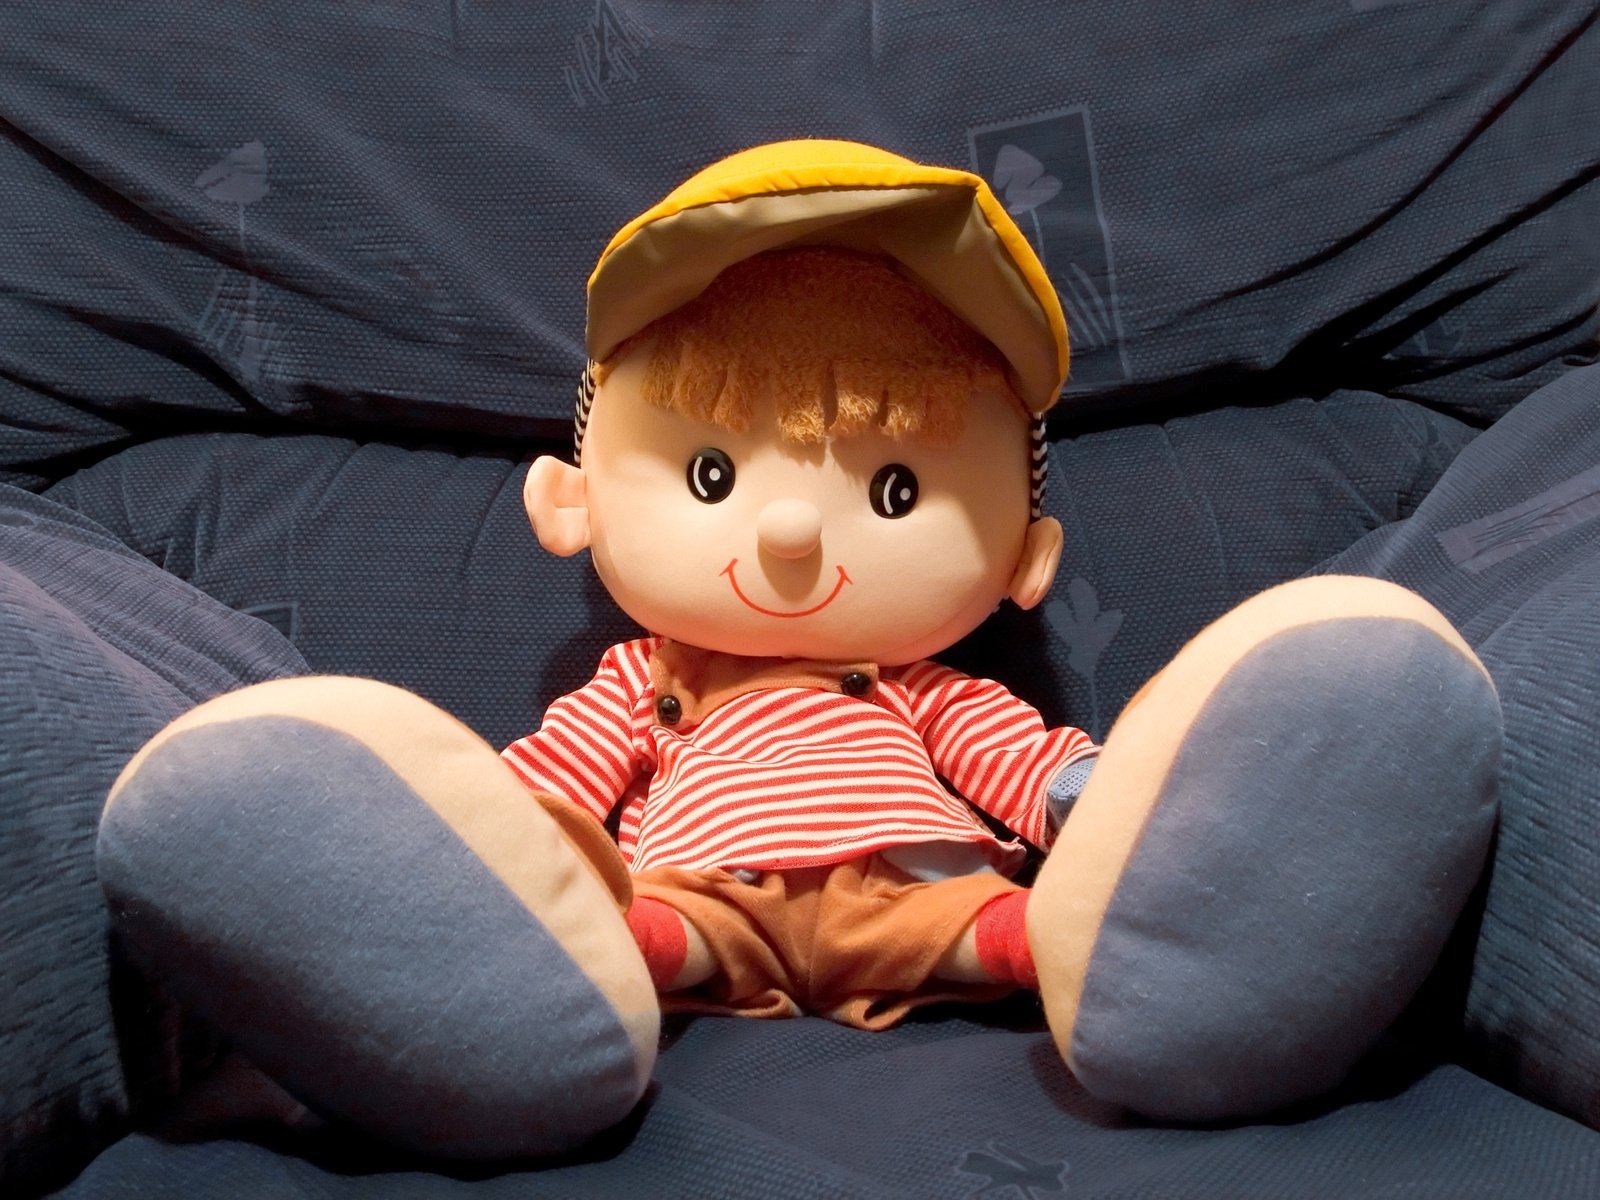 a stuffed doll wearing a striped shirt and hat